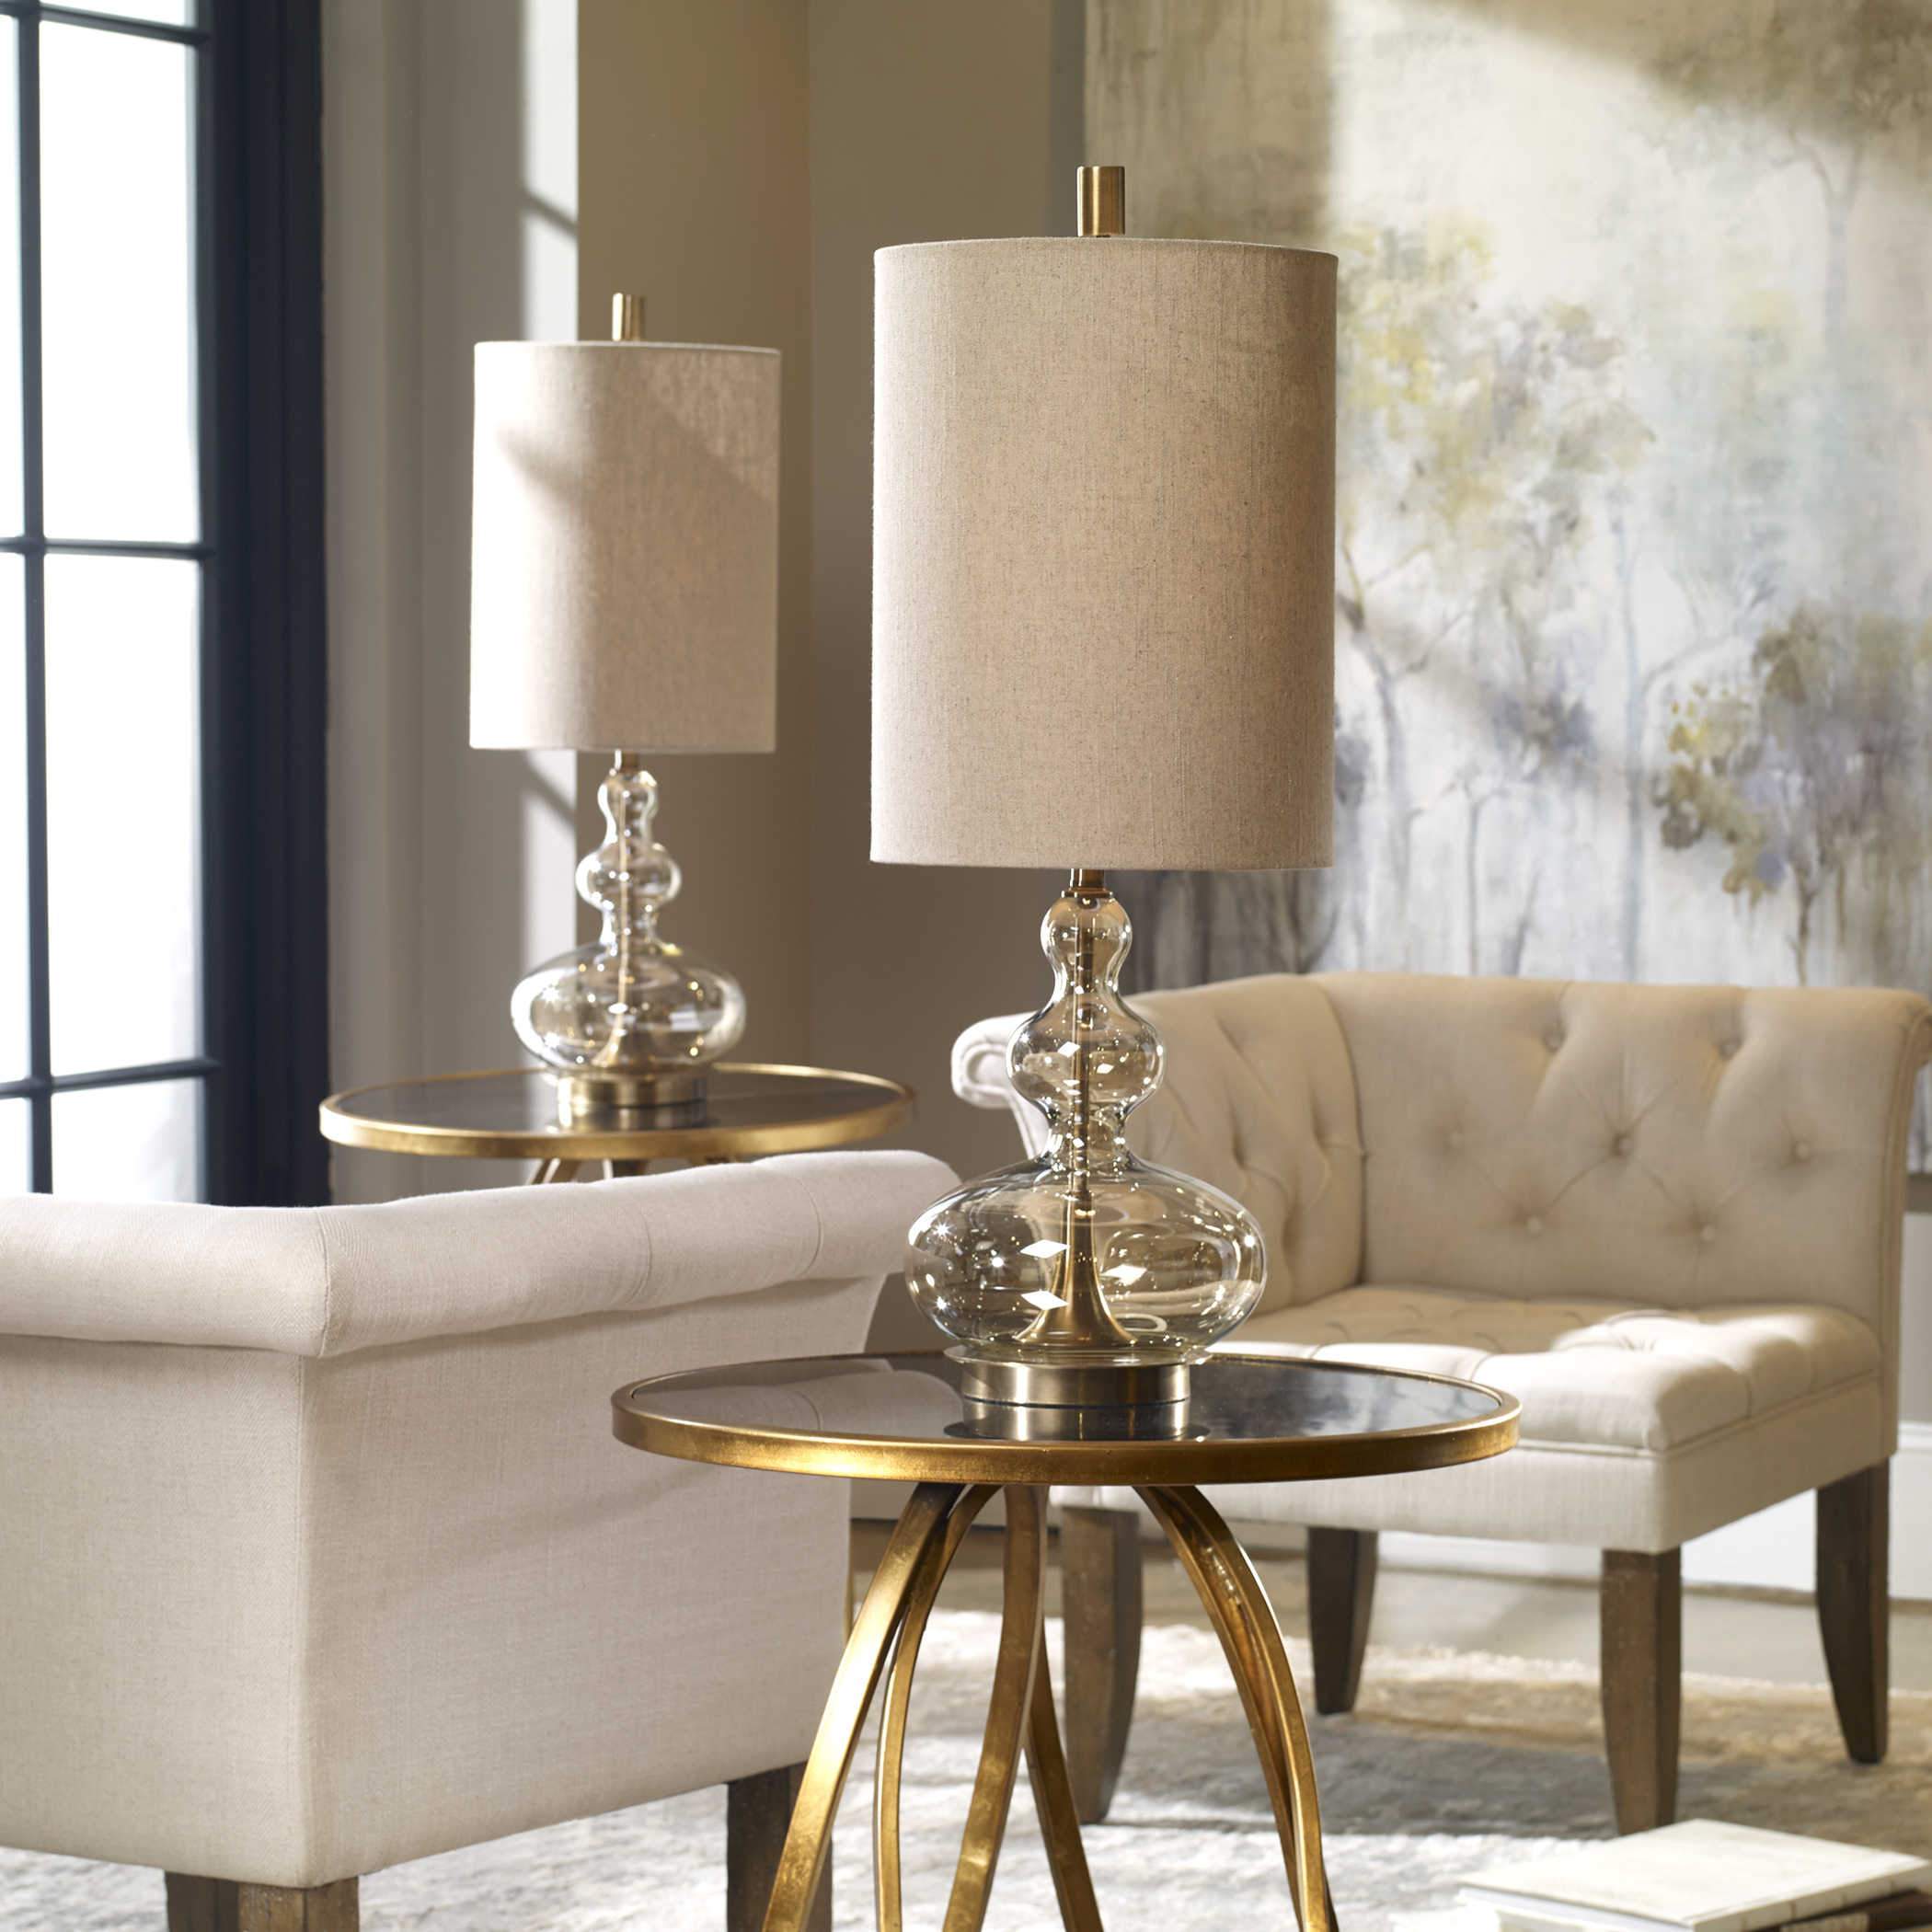 Uttermost Formoso Accent Lamp